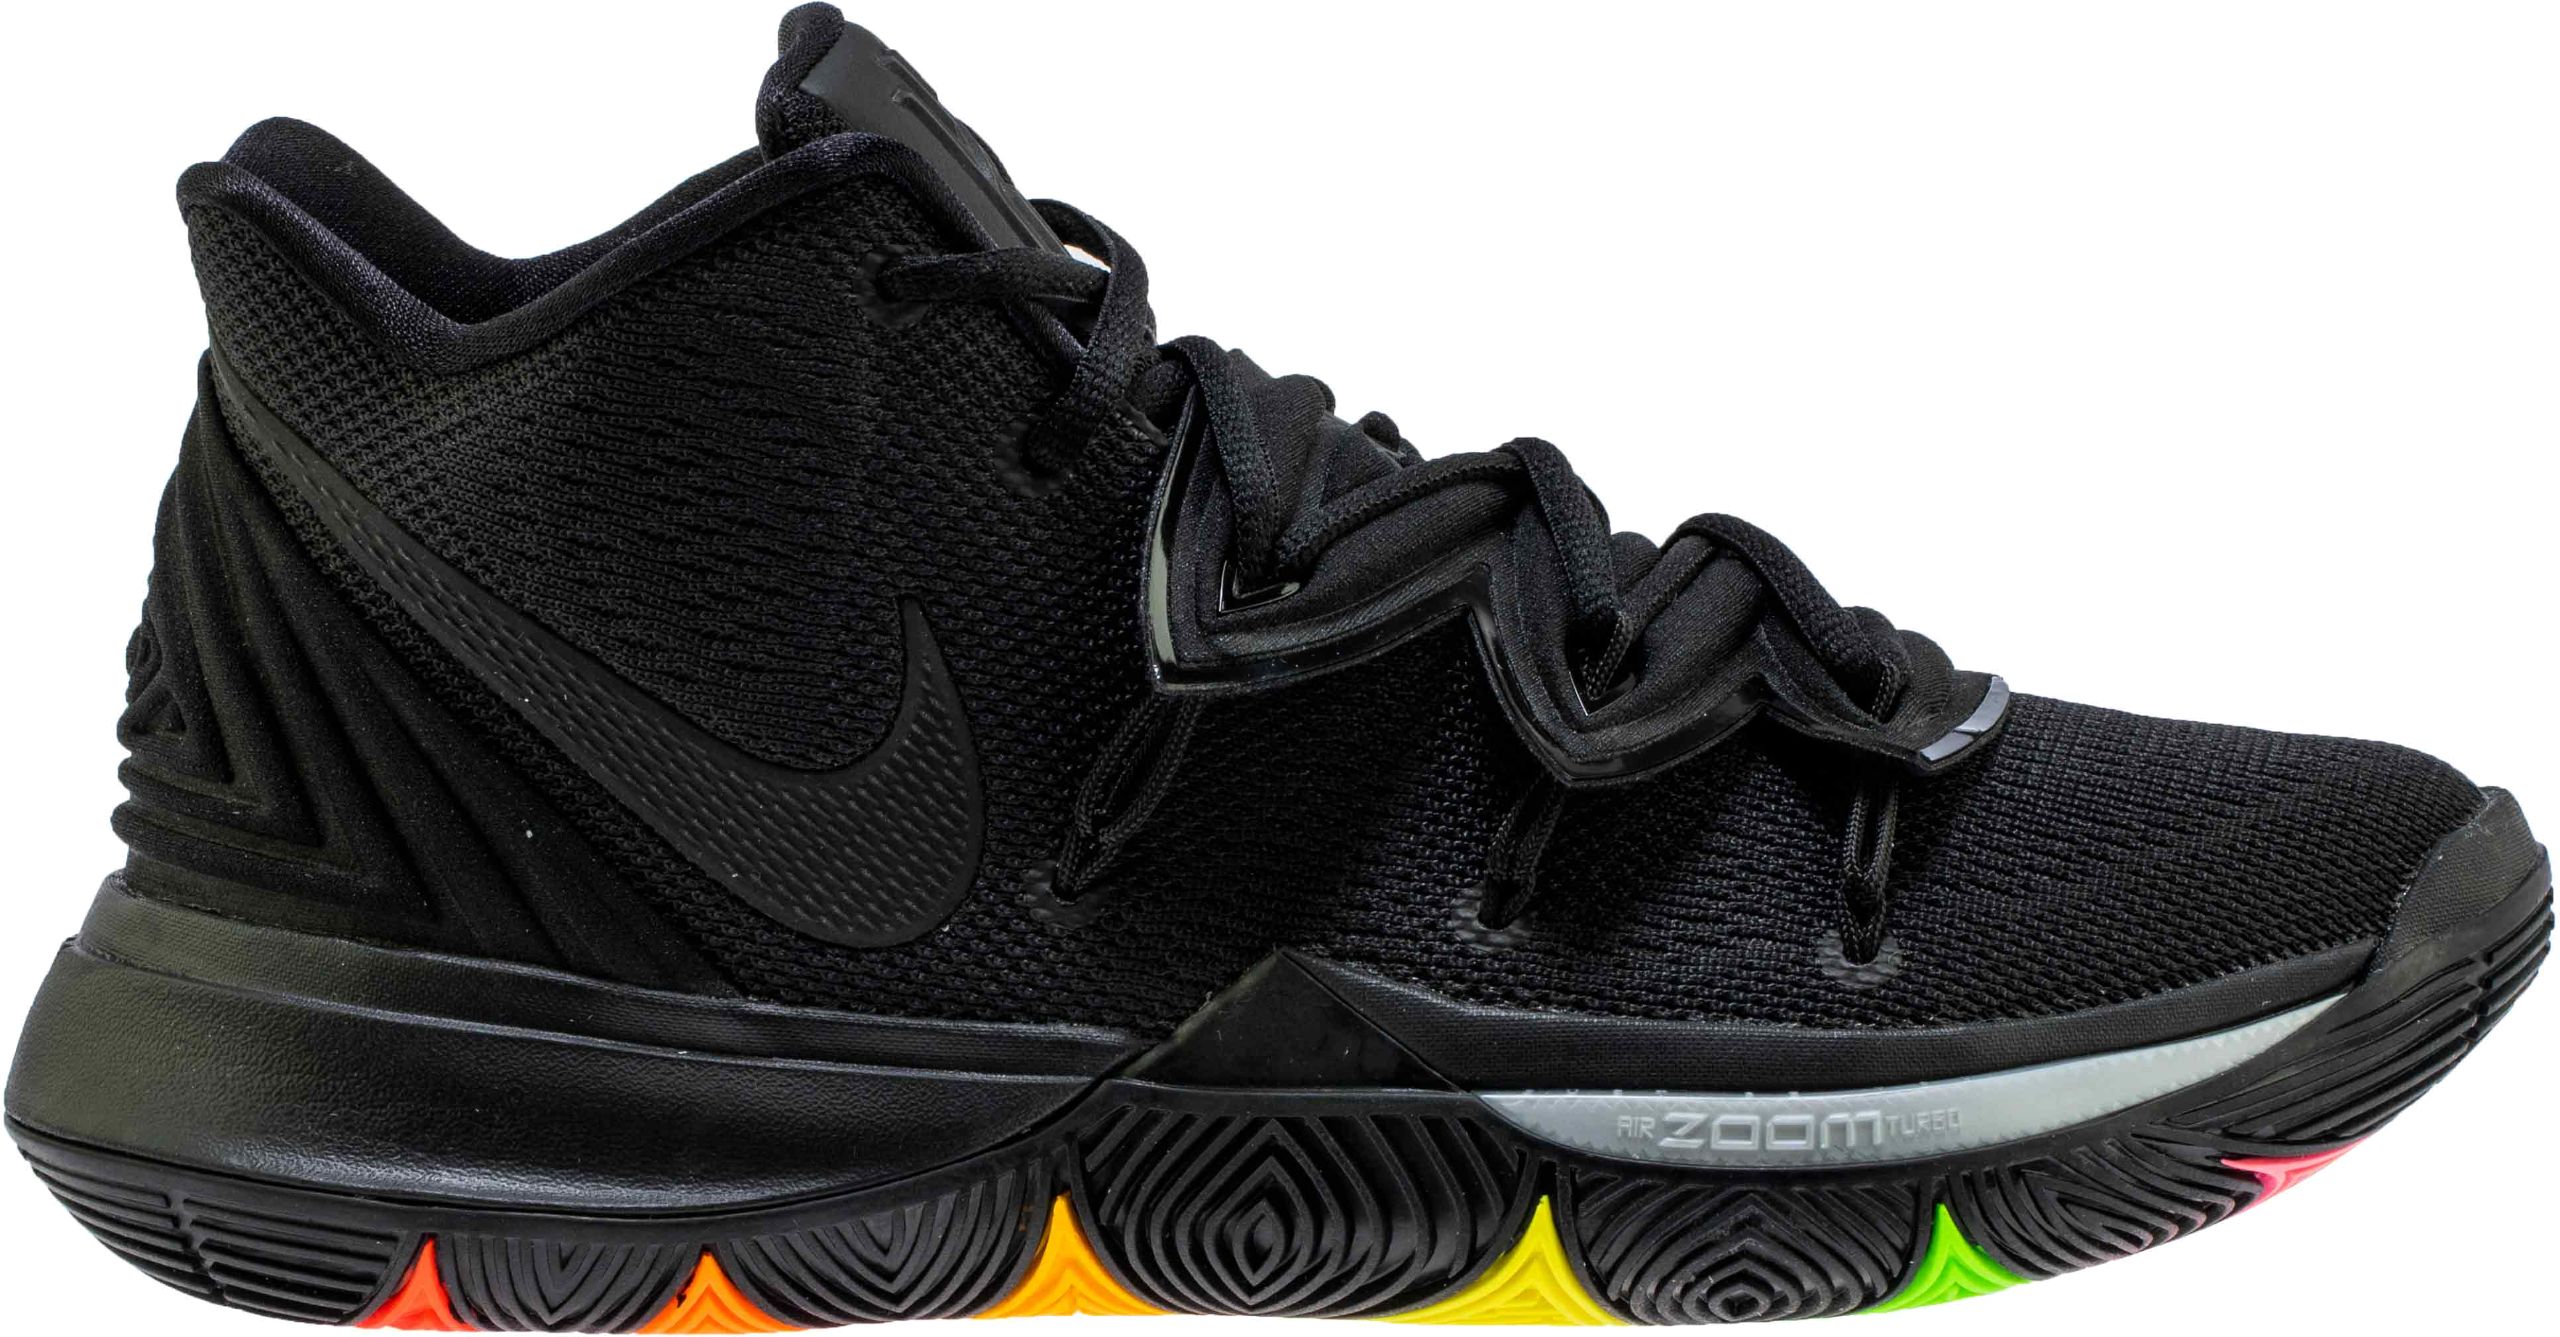 Can 't Miss Bargains on Nike Kyrie 5 Basketball Shoes White